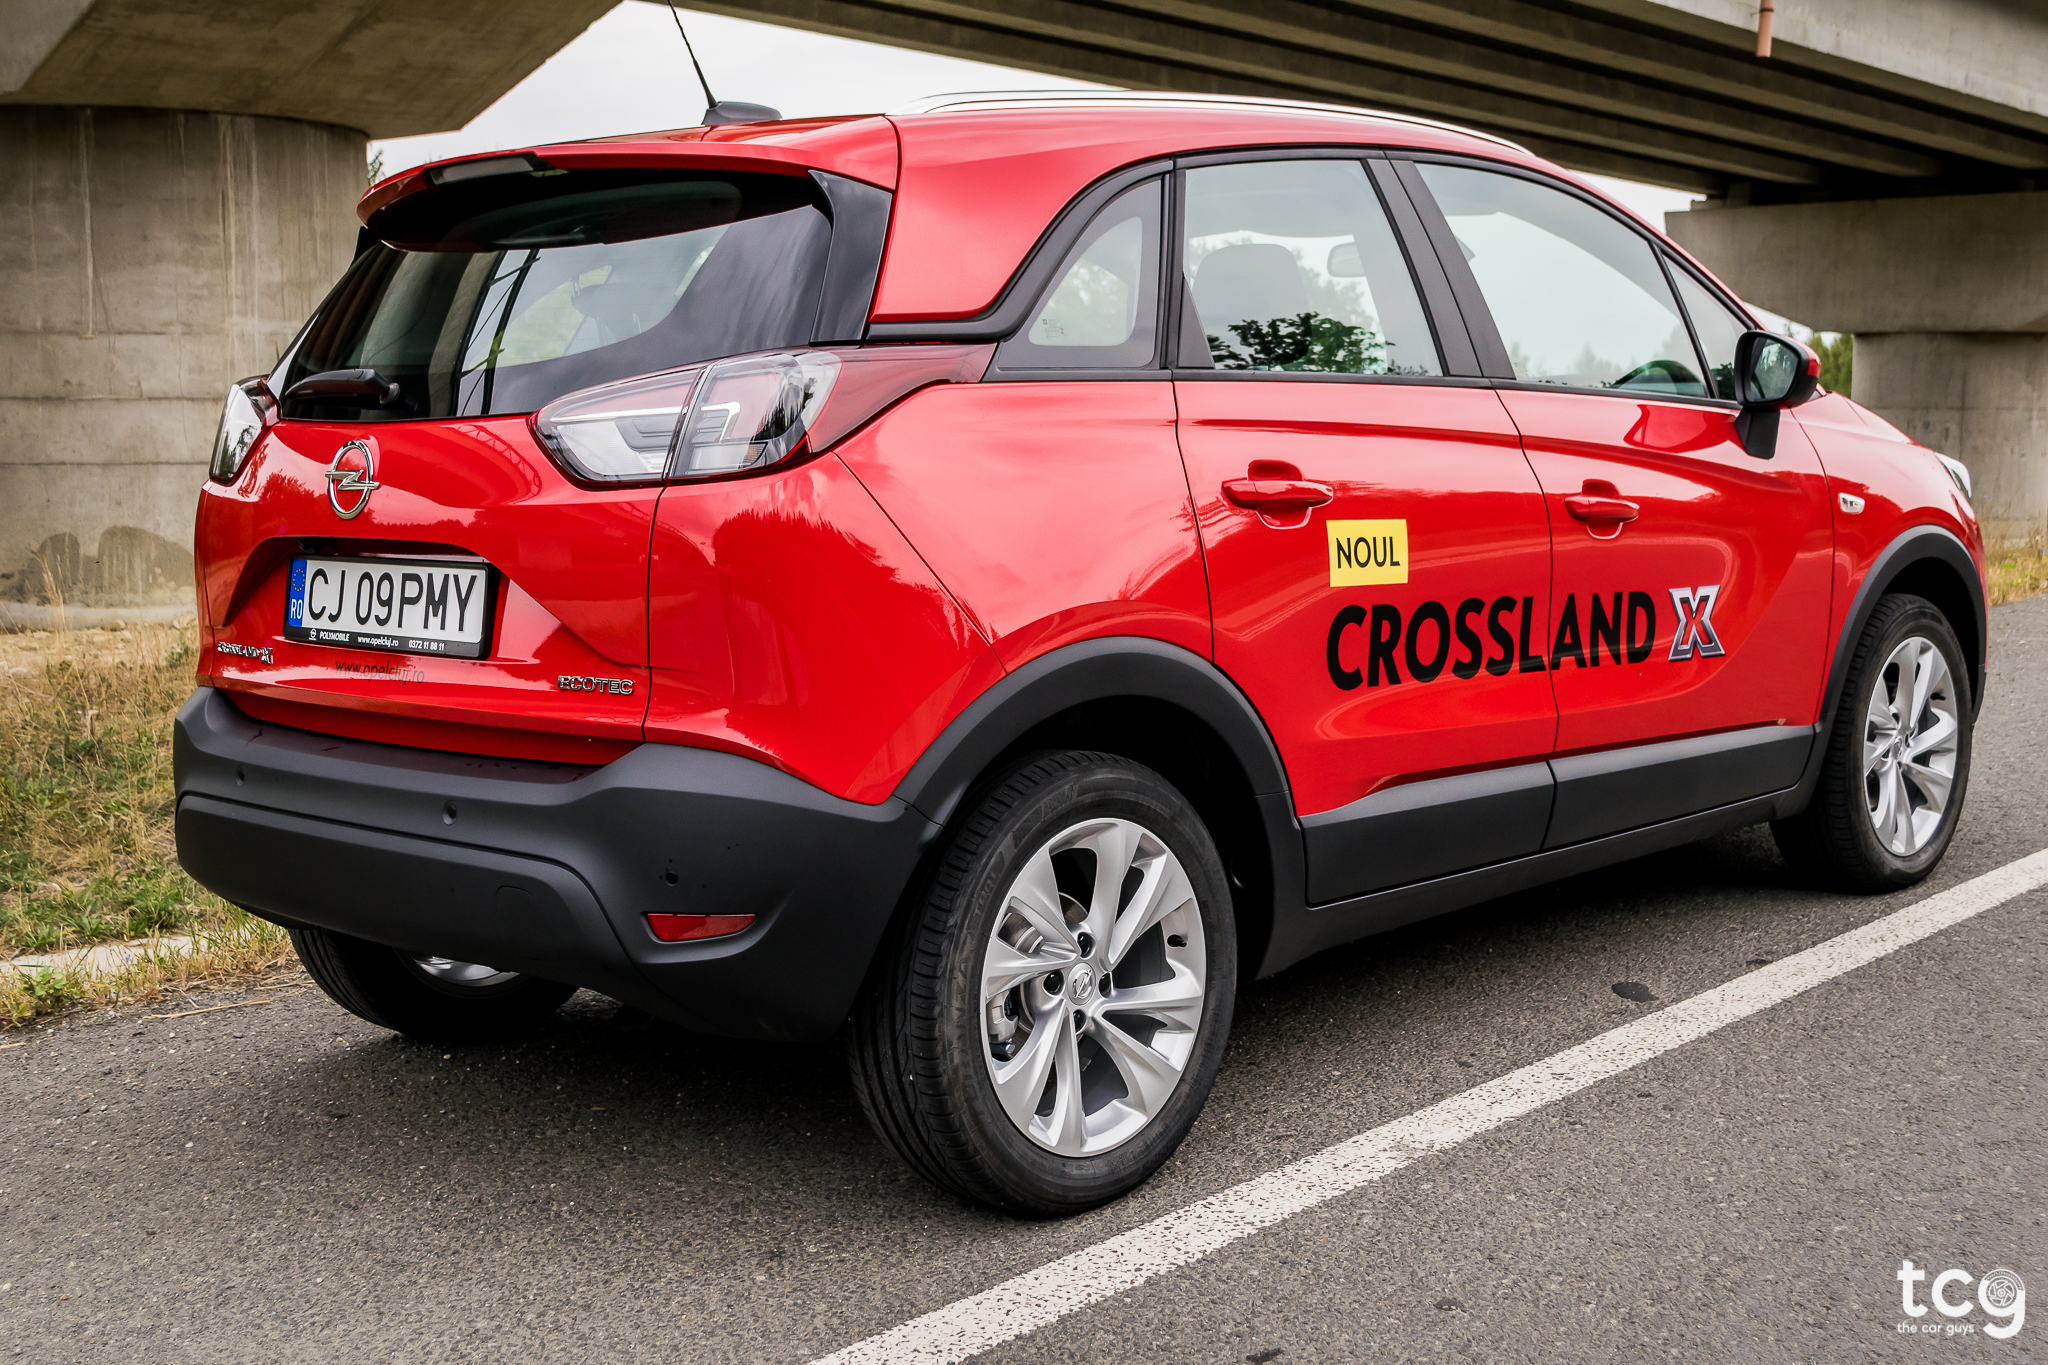 Opel Crossland X - The Germans are turning French!